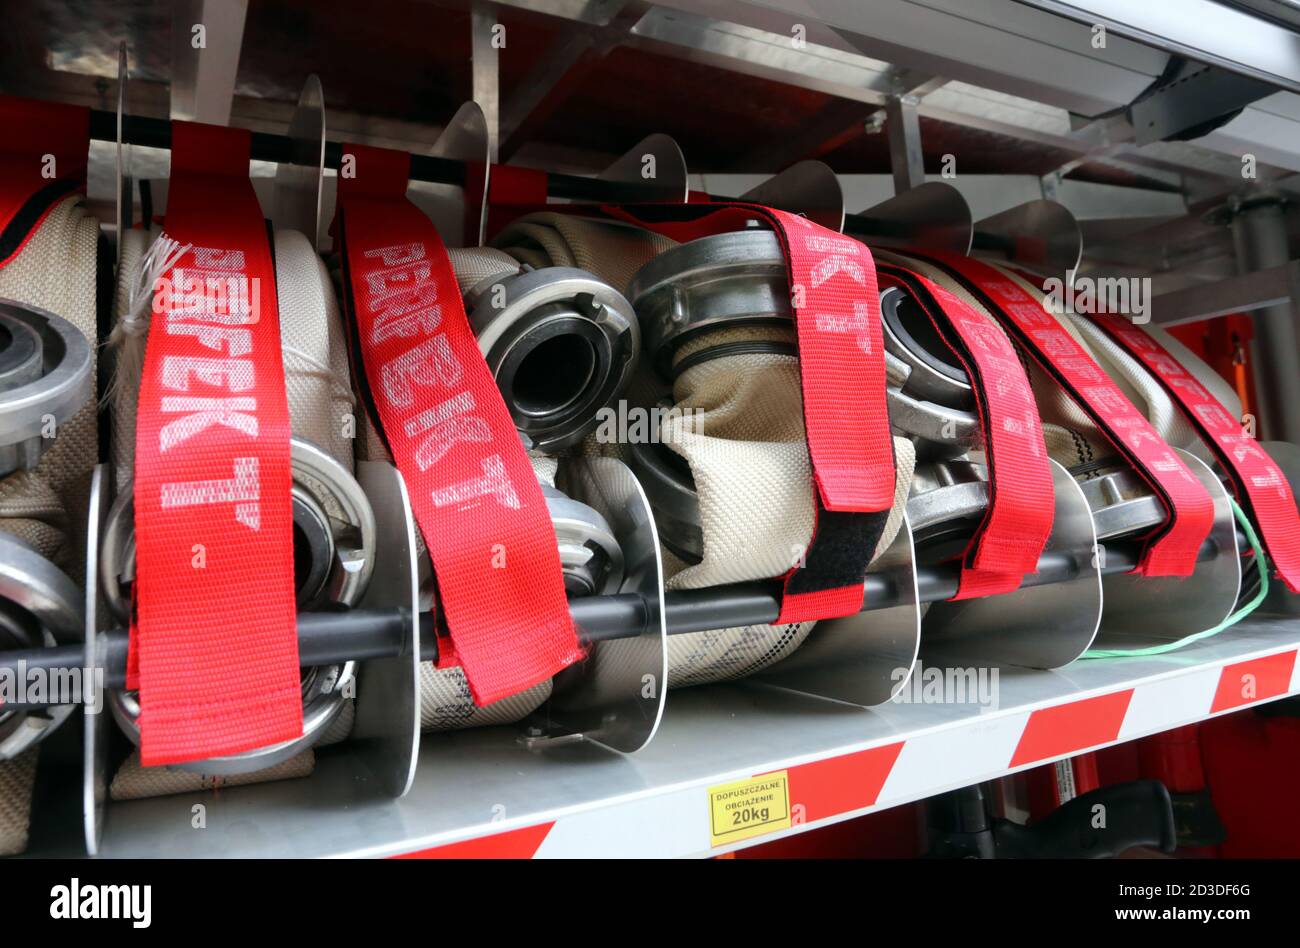 Cracow. Krakow. Poland. Canvas hosepipes with metal couplings rolled up in the fire truck storage compartment. Stock Photo